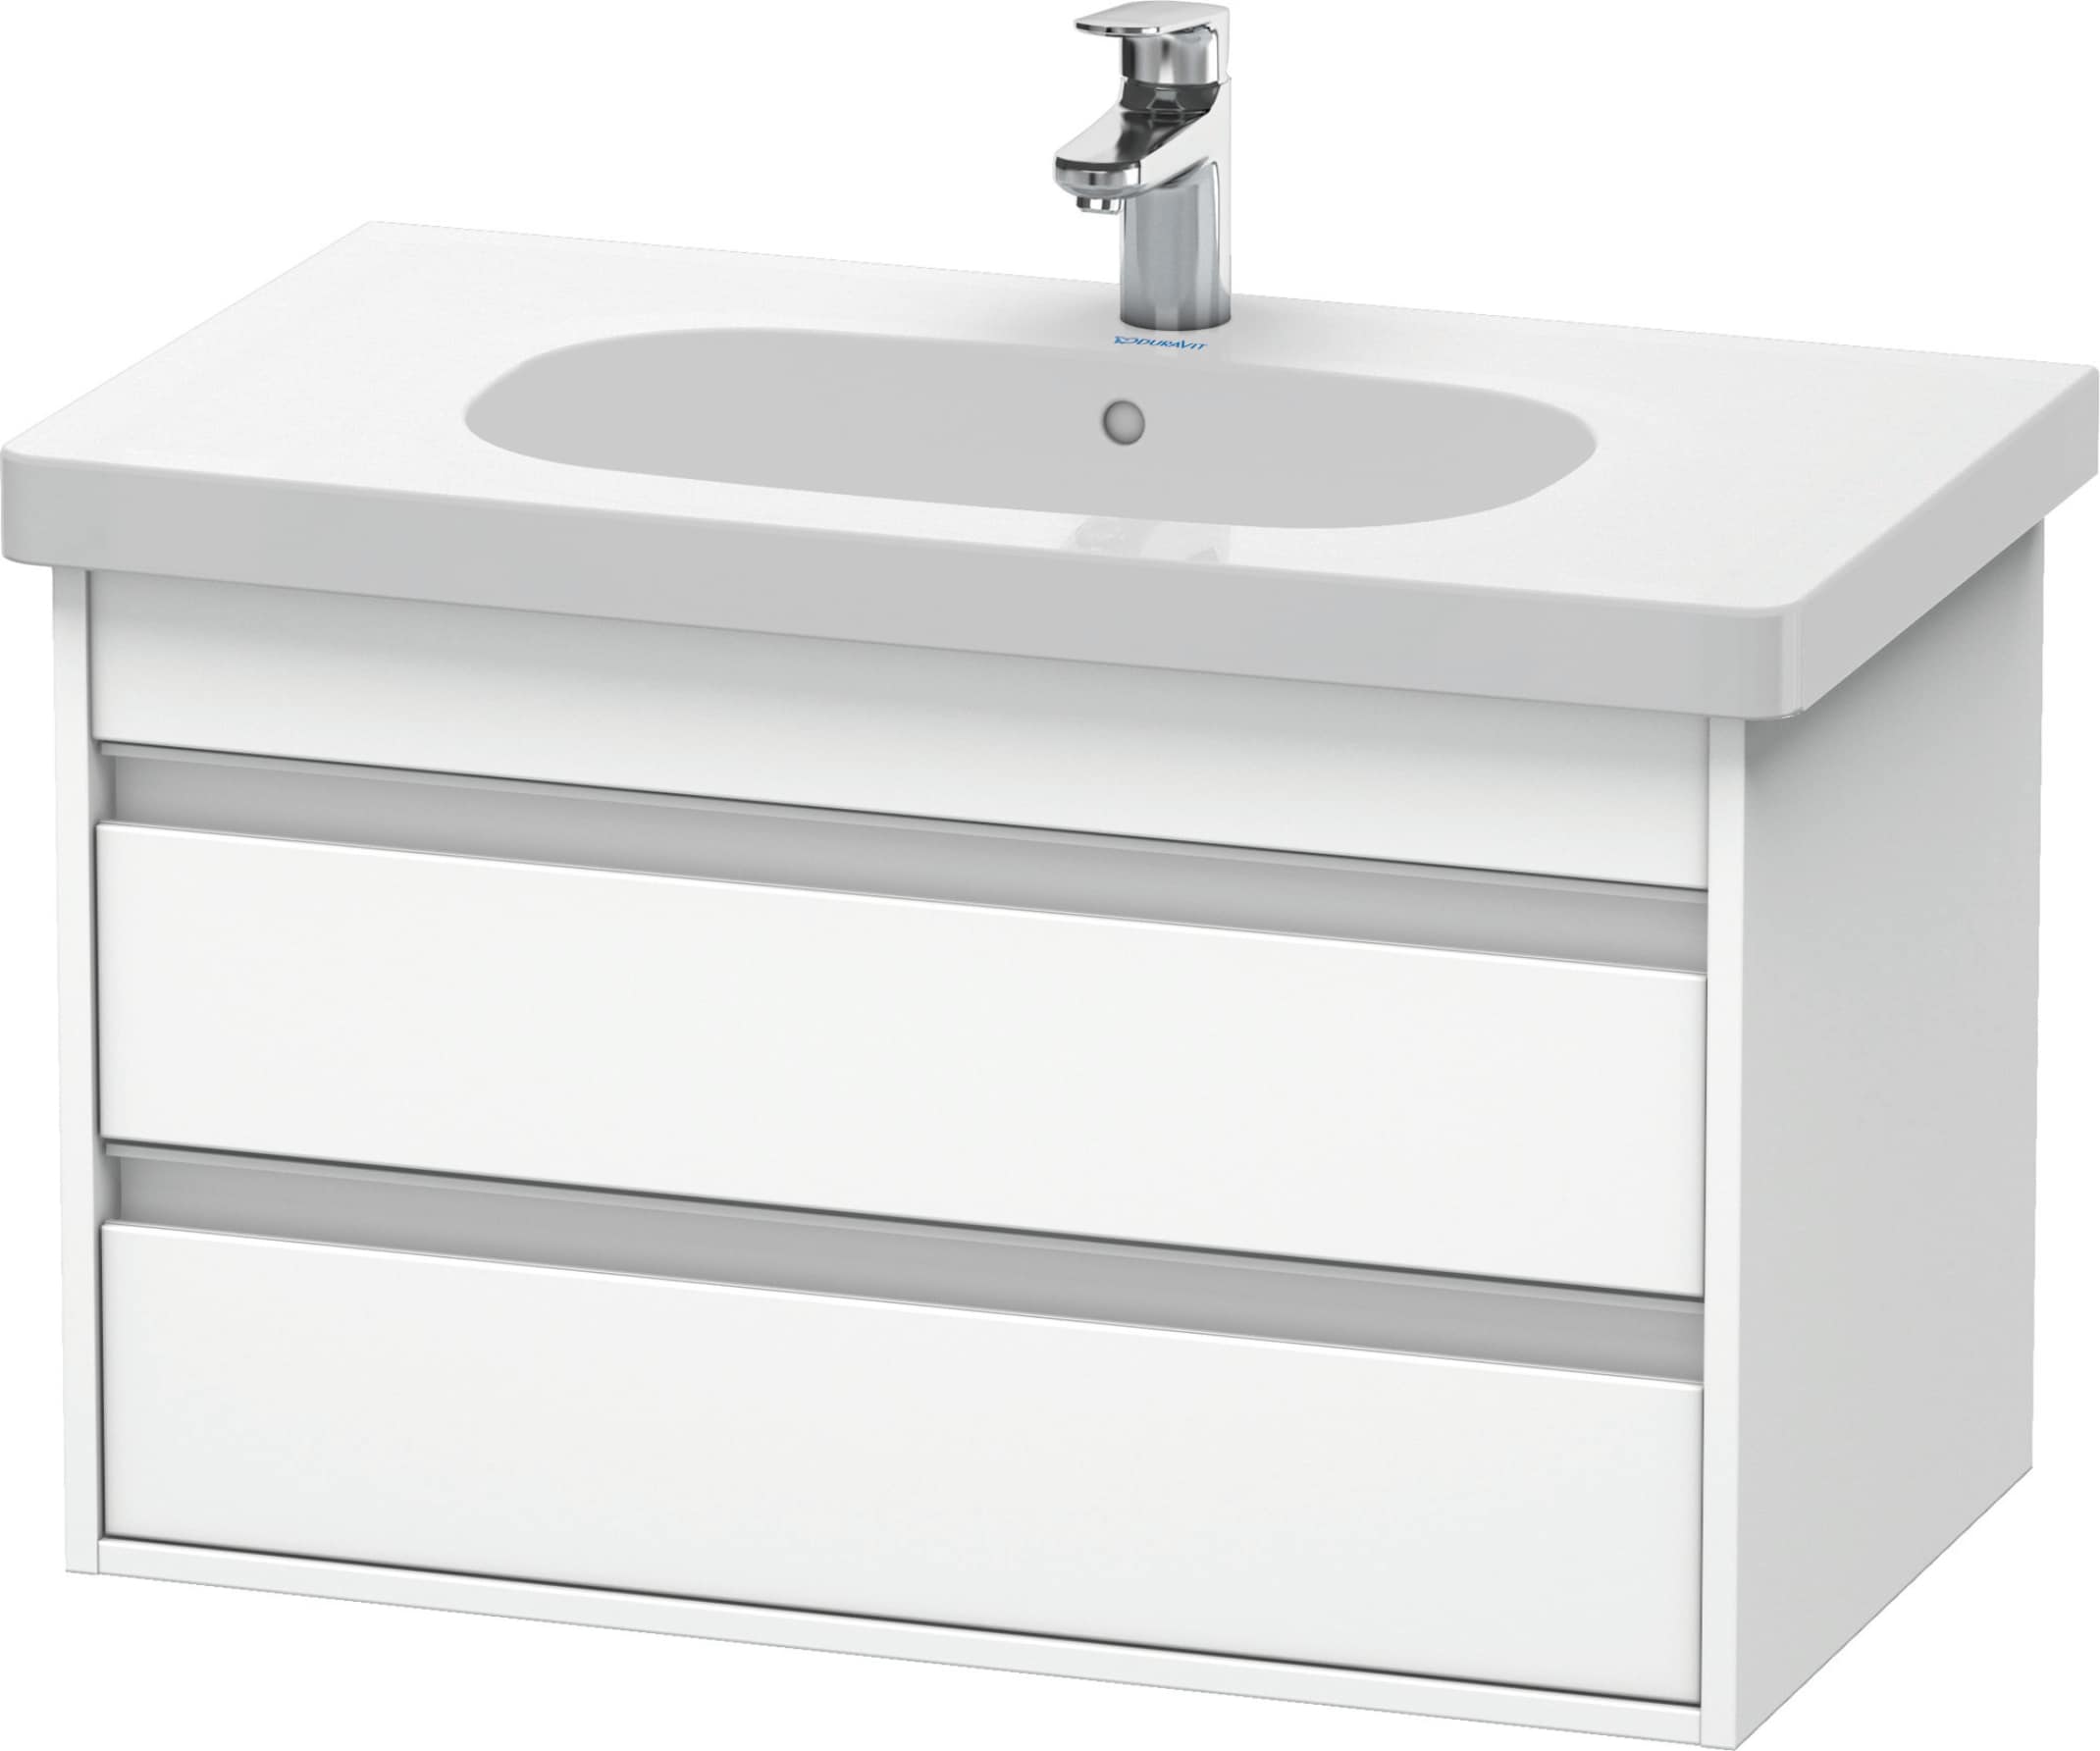 Ketho 31-in White Matte Bathroom Vanity Base Cabinet without Top | - Duravit KT664701818